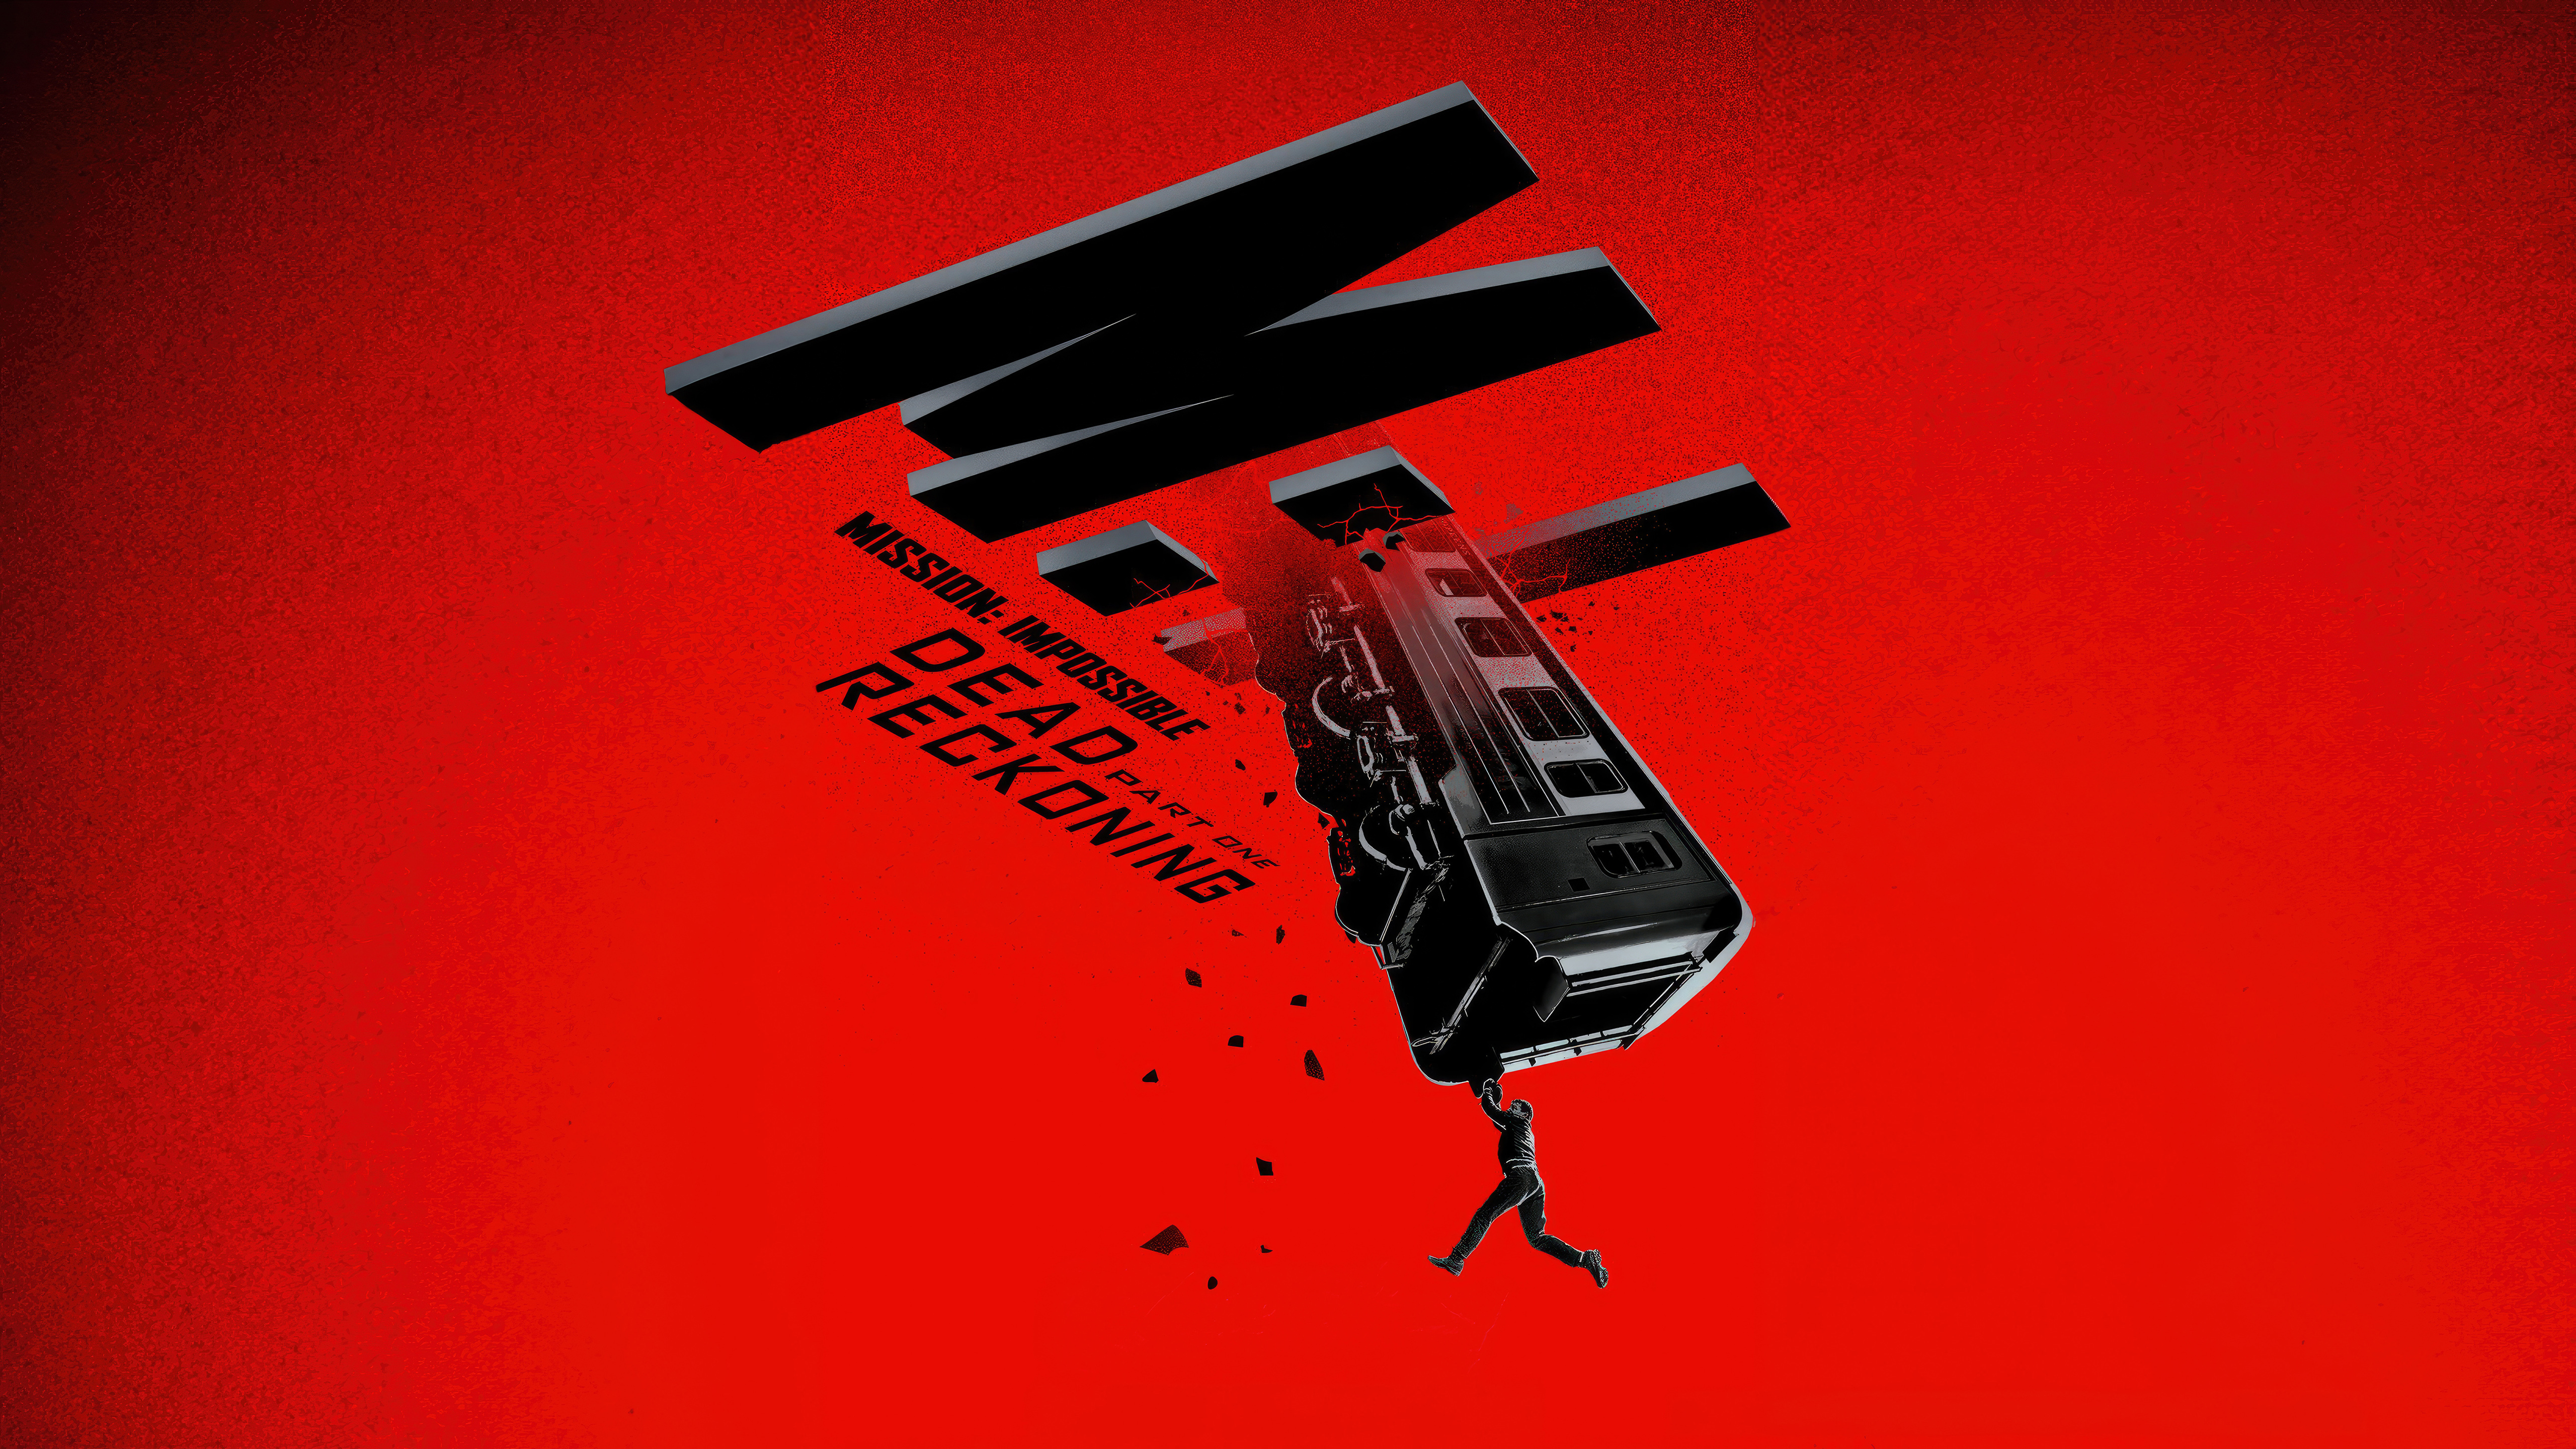 Mission Impossible Dead Reckoning Part One Title Simple Background Minimalism Digital Art Red Backgr 5120x2880